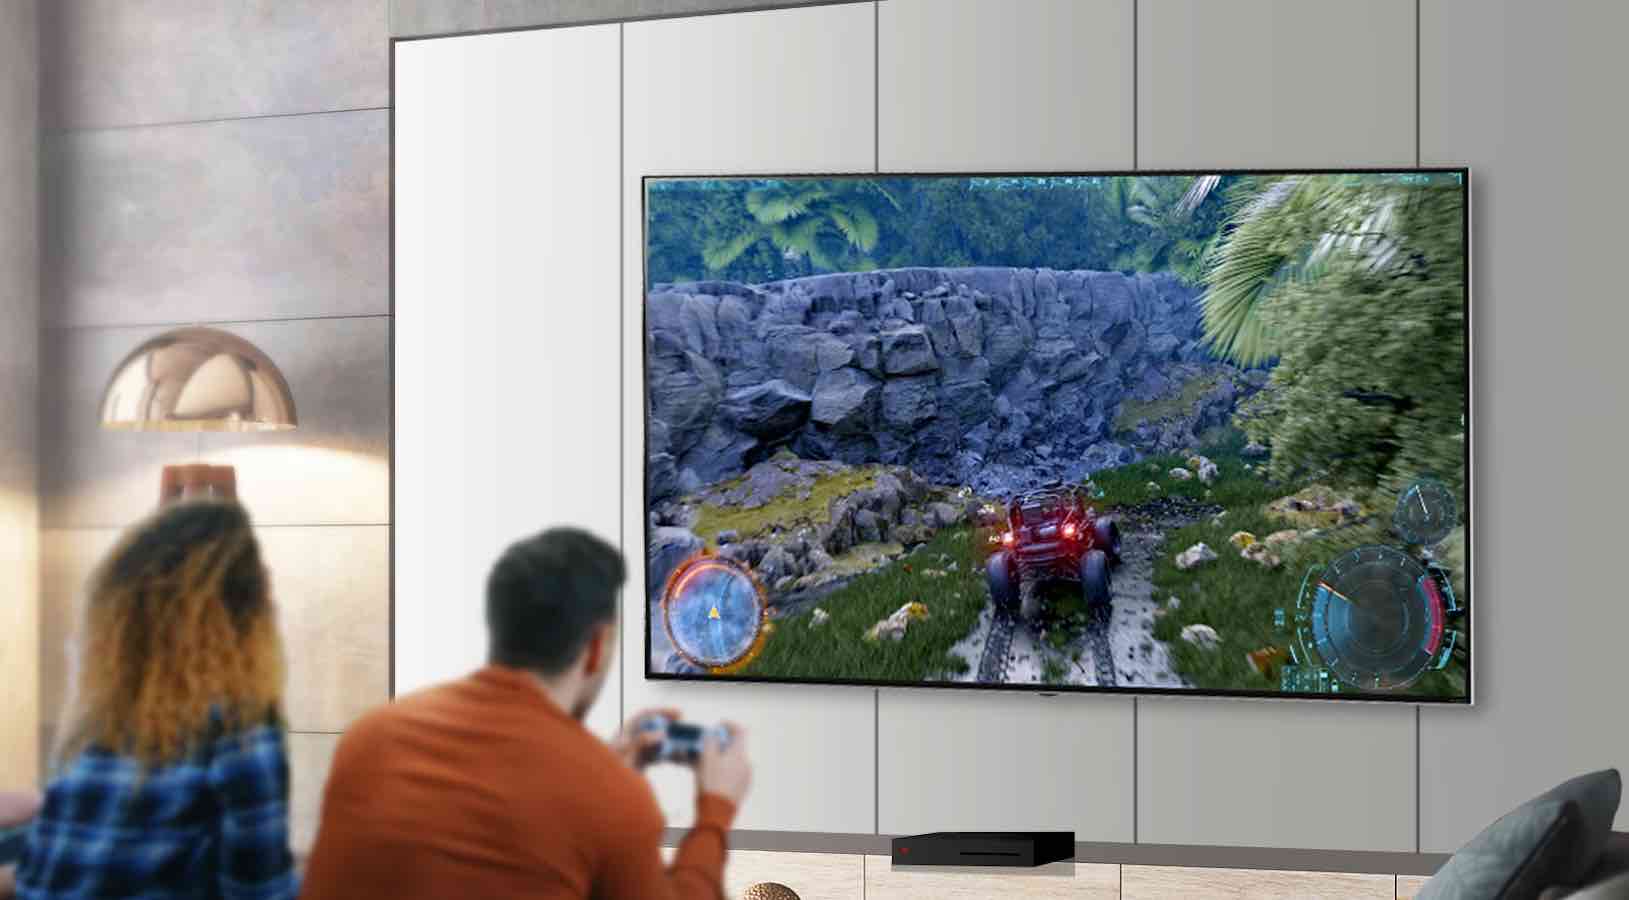 Smart TV refresh rates (60 or 120Hz): Which is the best? - Dignited